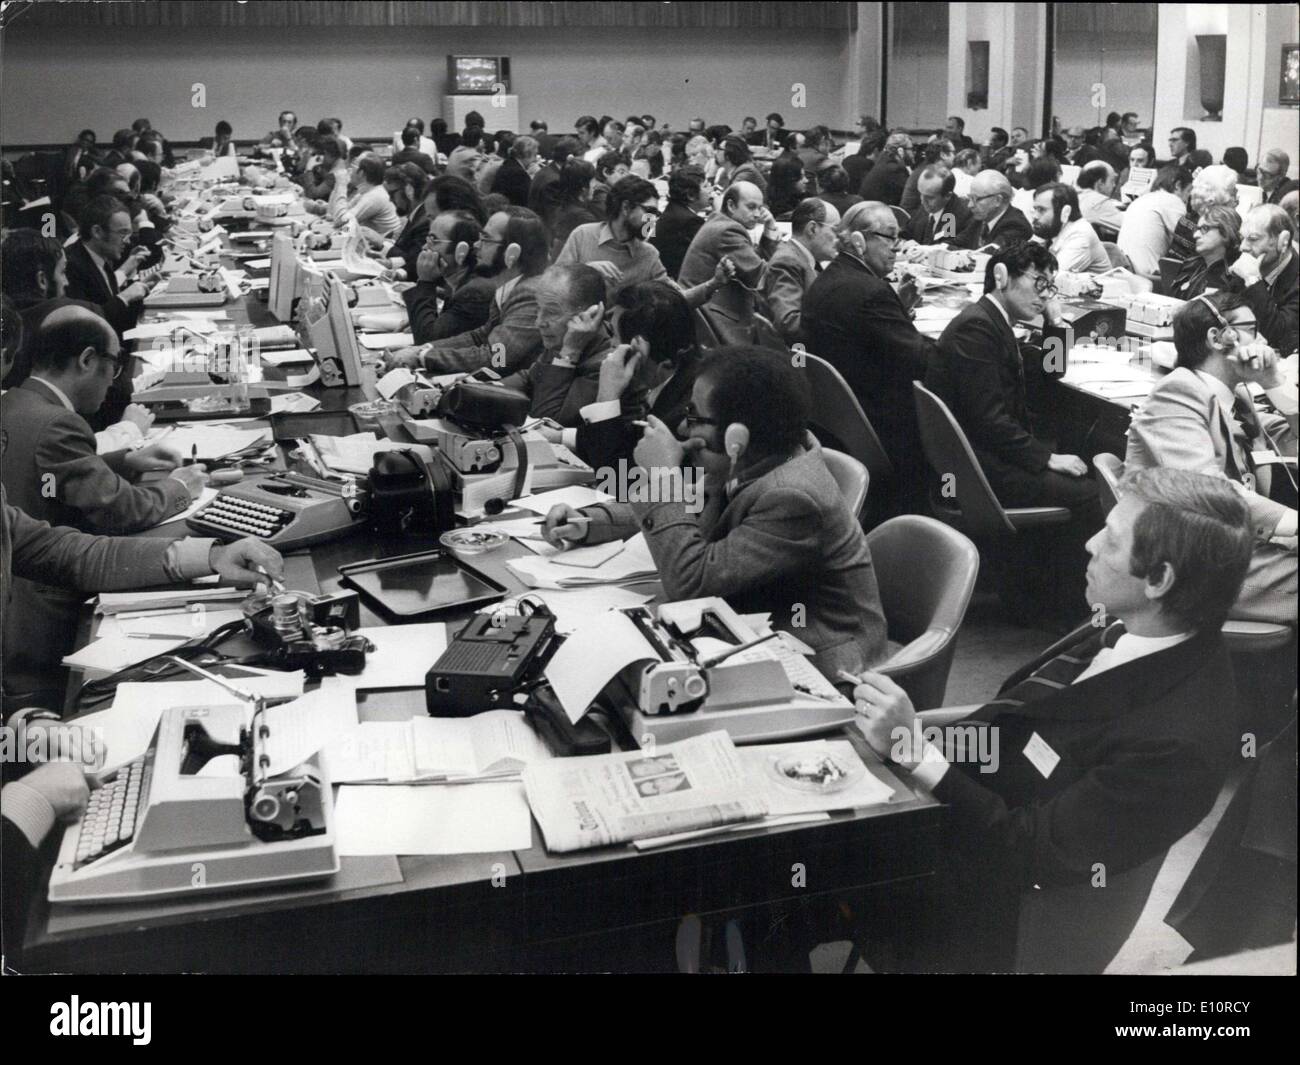 Dec. 22, 1973 - Geneva Peace Conference. OPS: The press room for the Geneva peace conference, where about 200 journalists are reporting the first conference meeting. Keystone Zurich 22-12-73 Stock Photo